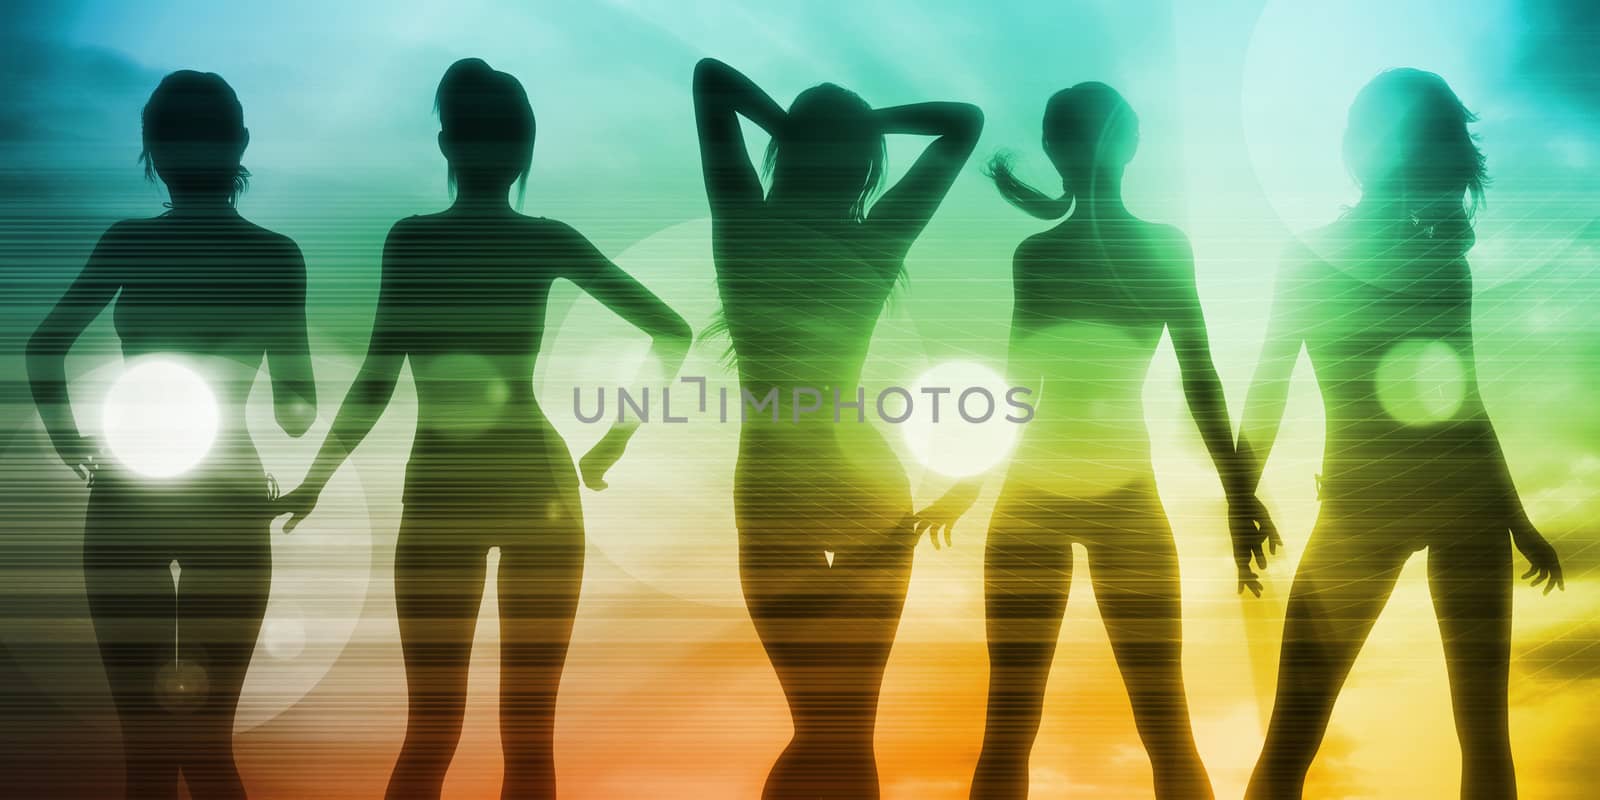 Disco Electronic Music Techno Party Background Art